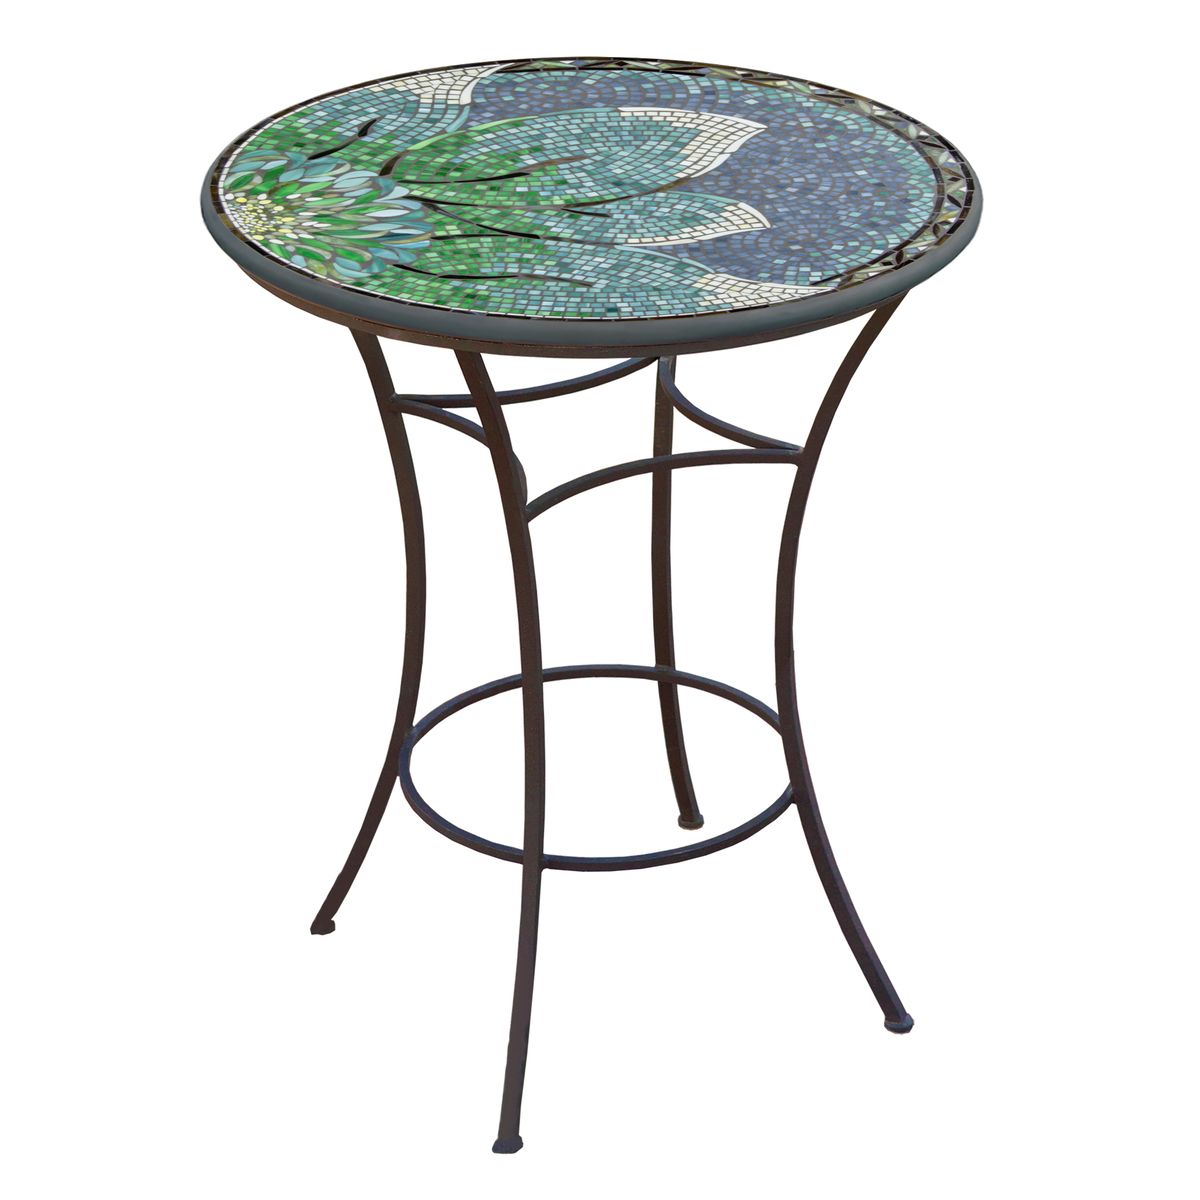 Lovina Mosaic High Dining Table-Iron Accents